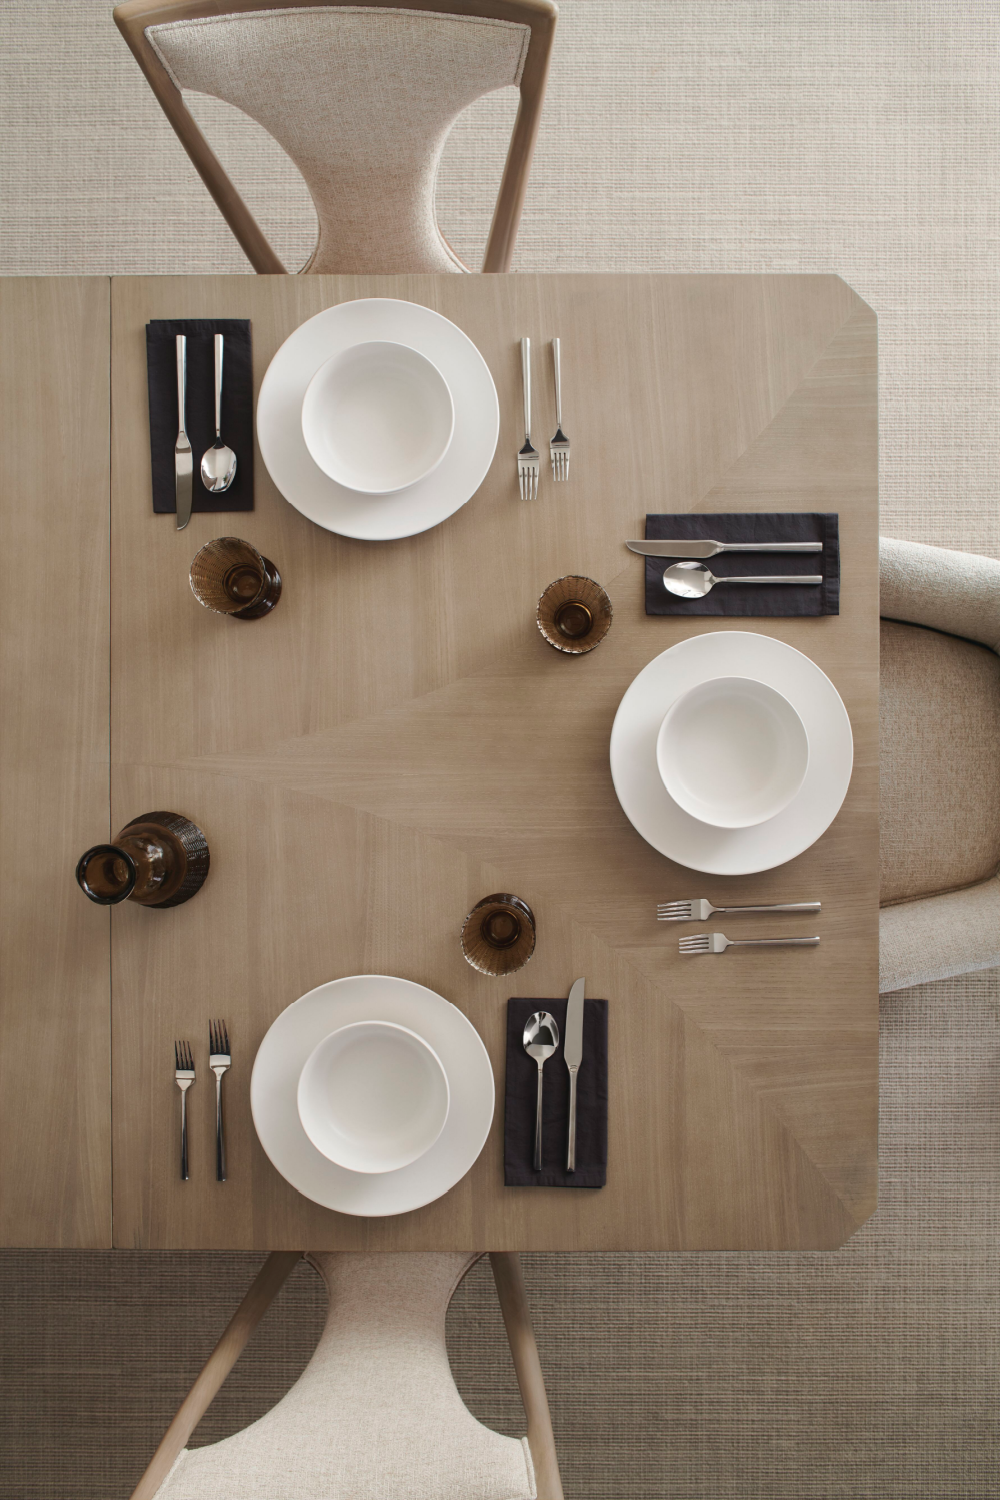 Beige Extendable Dining Table | Caracole Here to Accommodate | Oroa.com